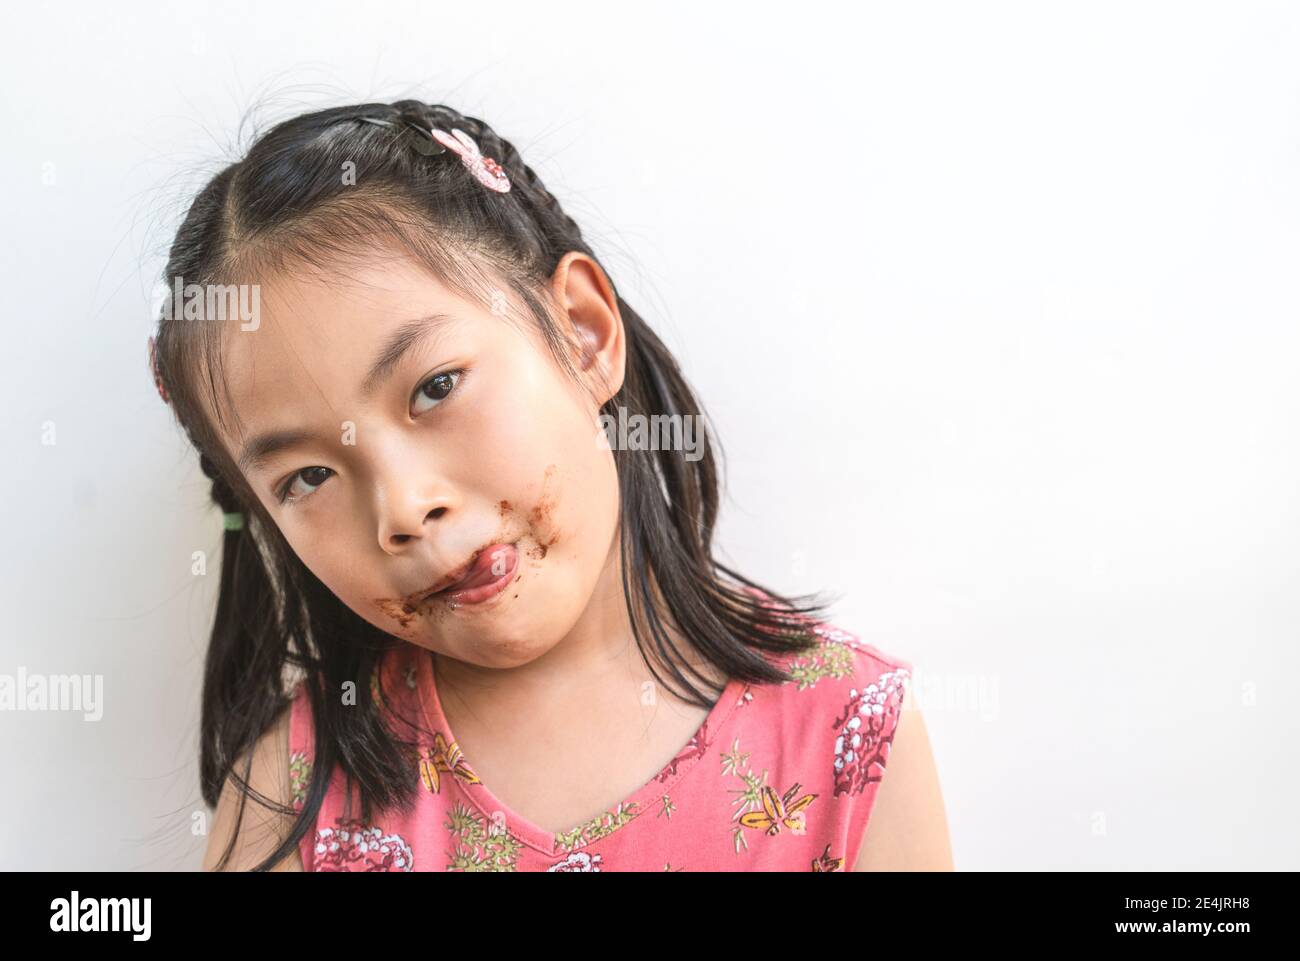 Portrait Asian cute child girl with messy of chocolate around her mouth, tongue licking lips, black hair, wearing beautiful pink dress, isolated image Stock Photo